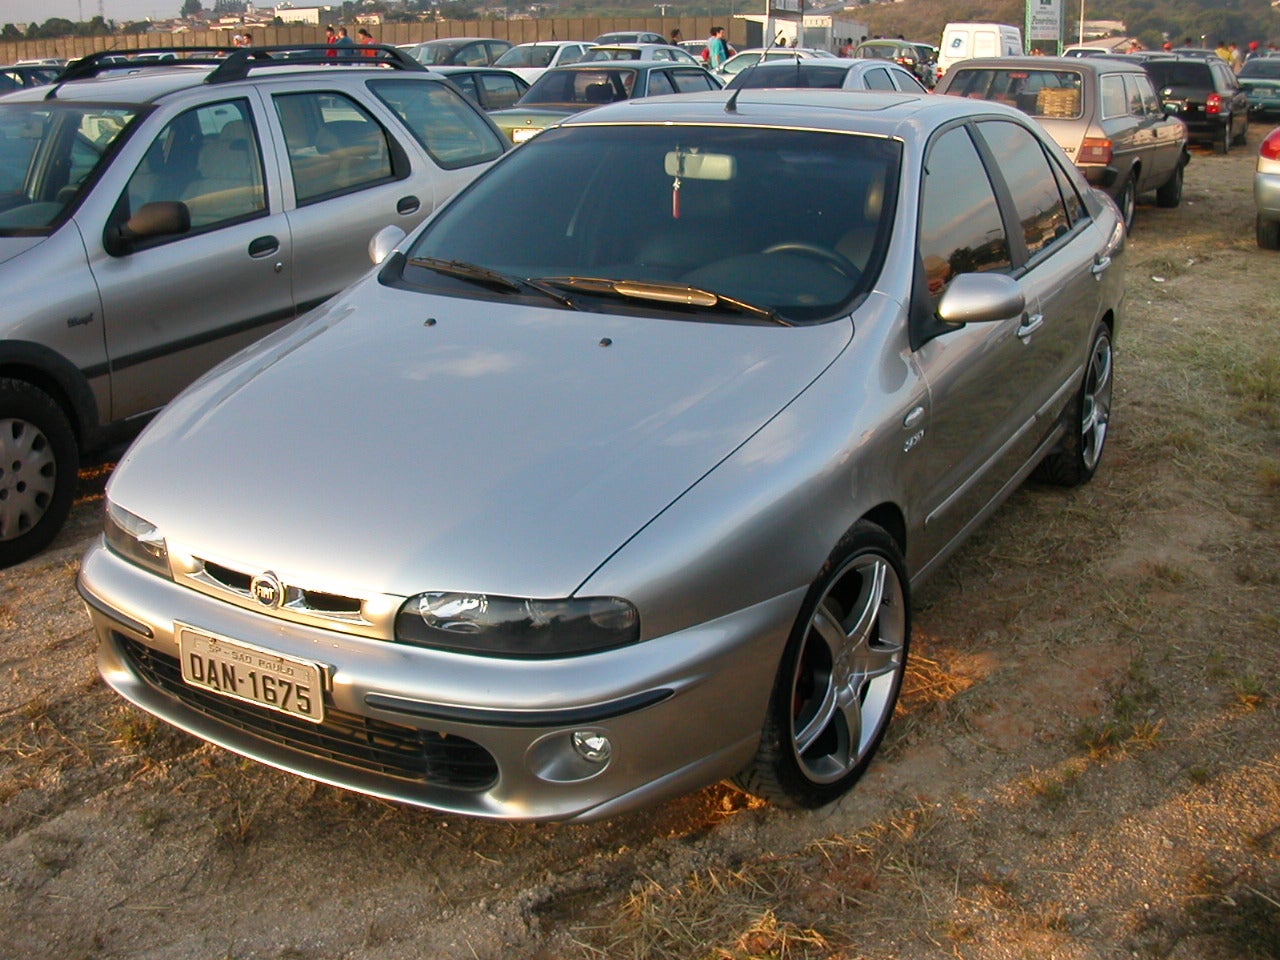 1996 Fiat Marea 1.4 12v related infomation,specifications